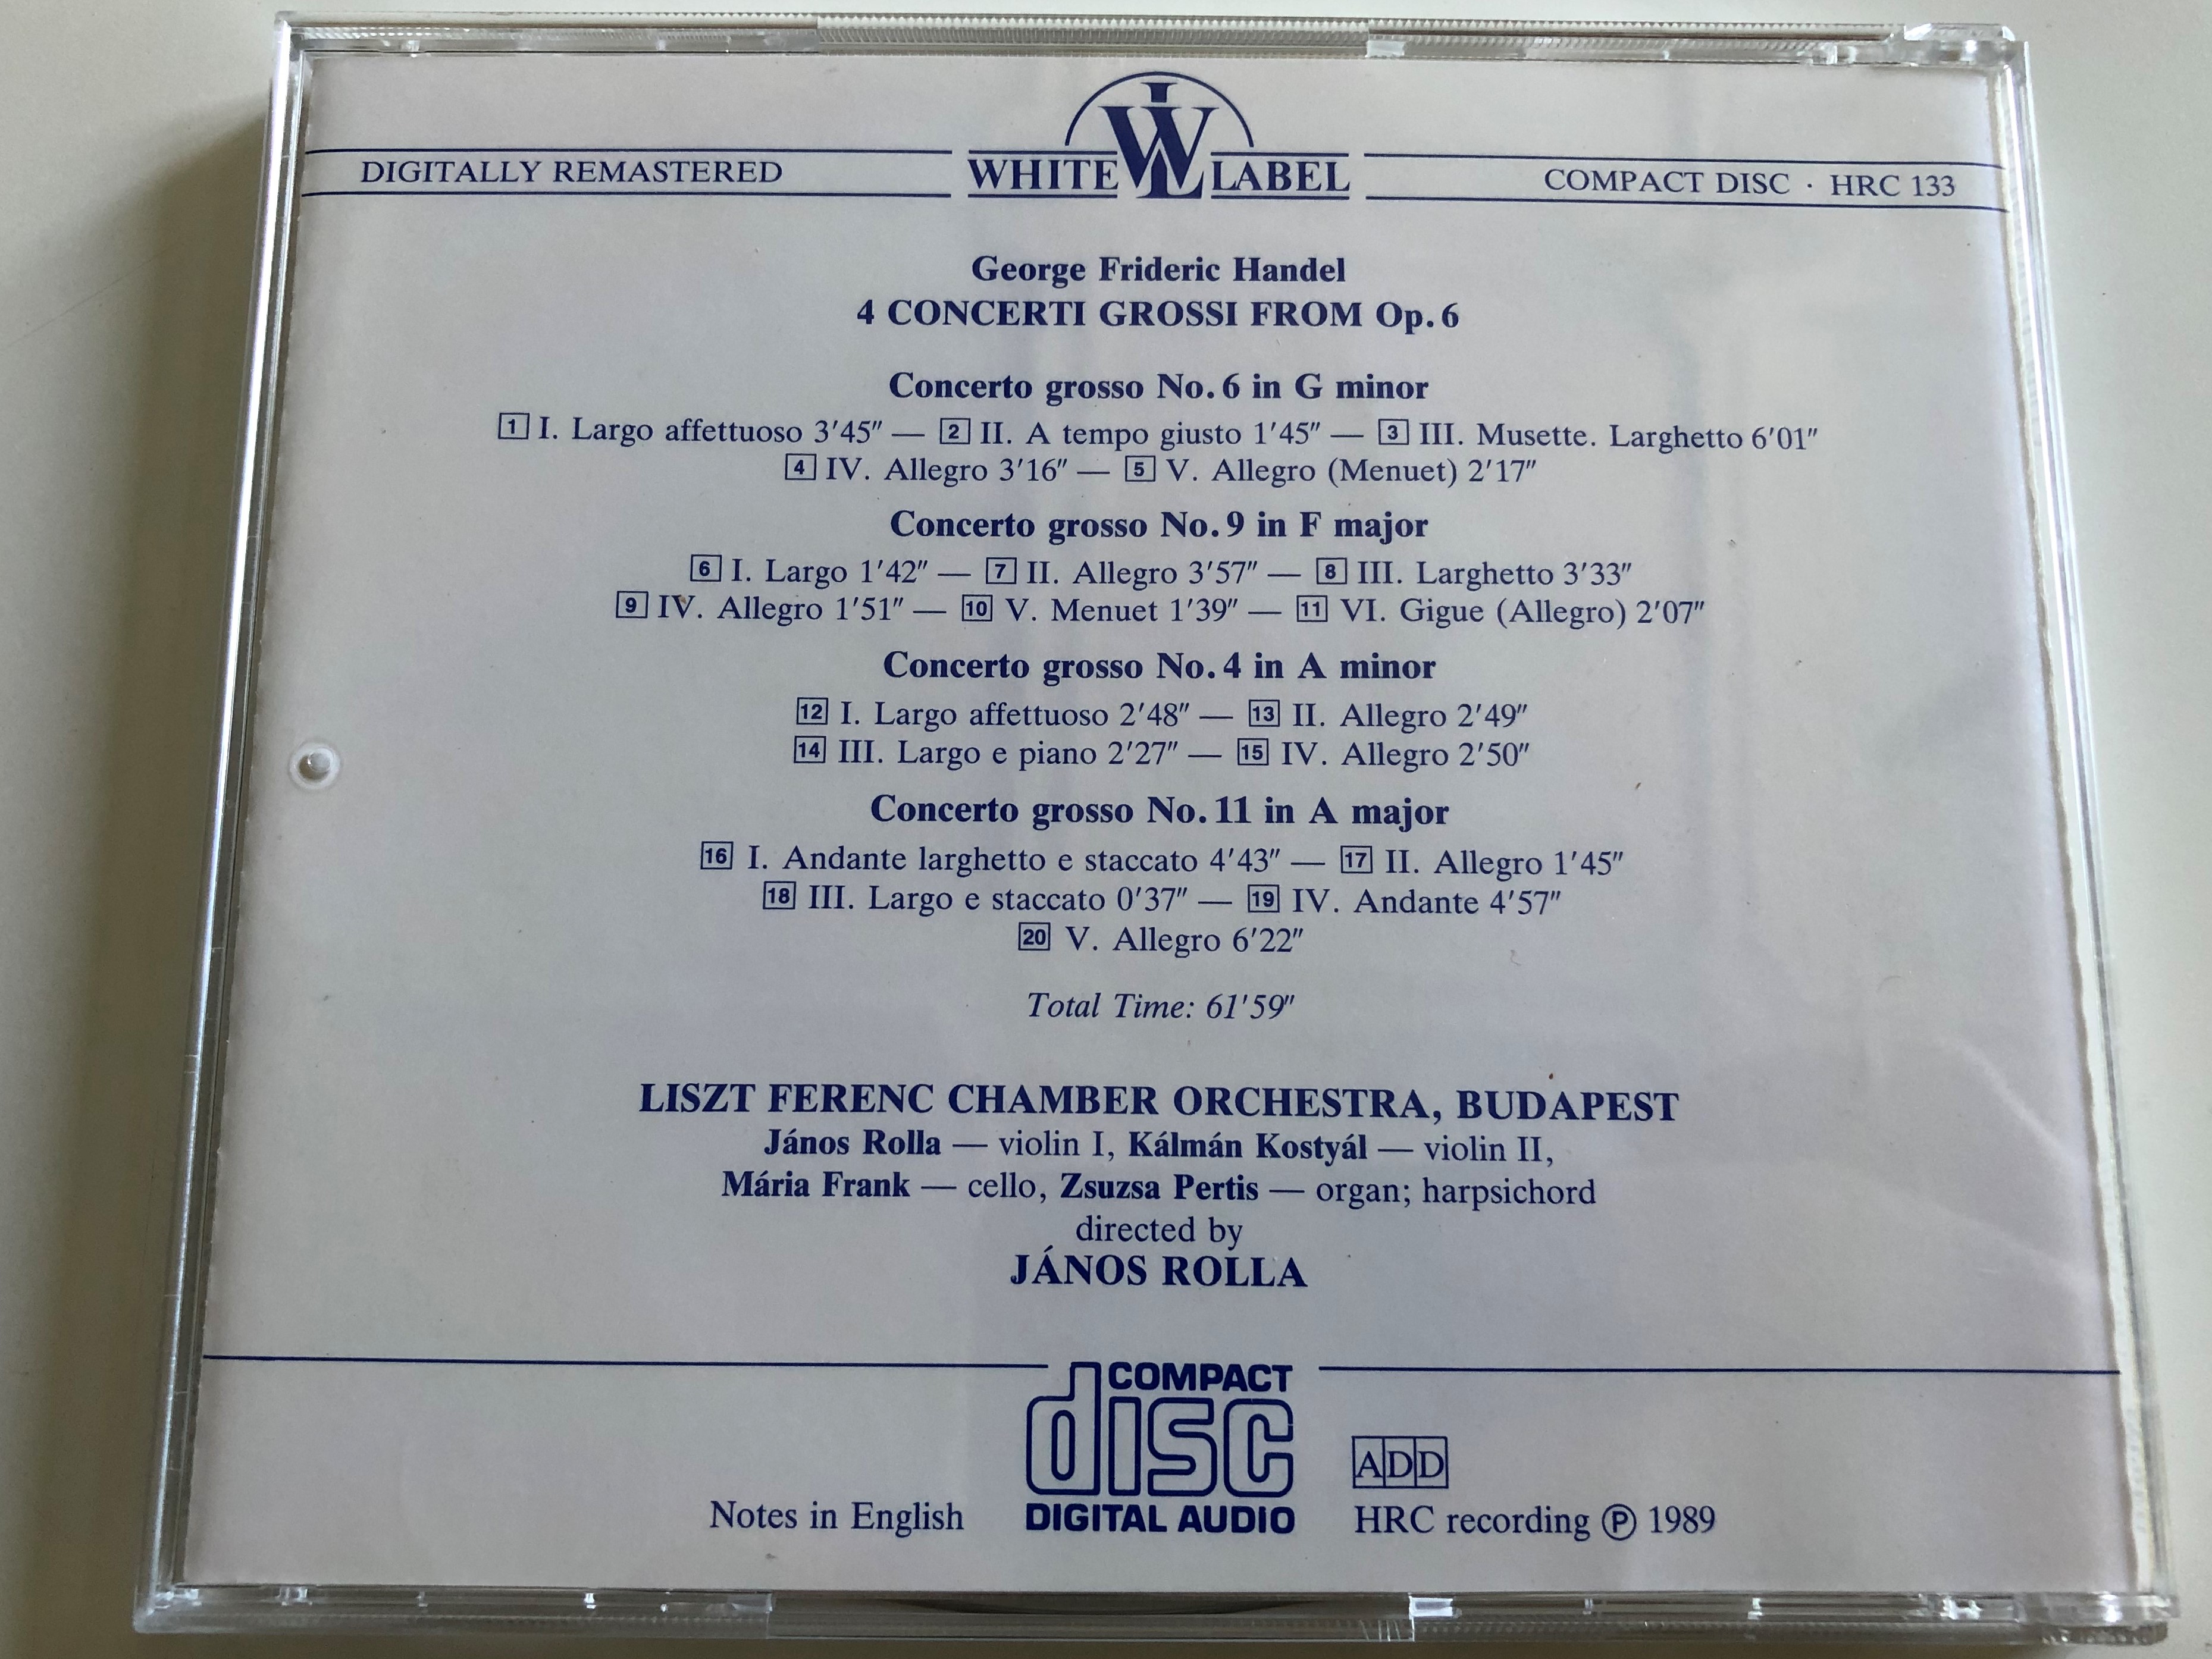 g.-f.-handel-4-concerti-grossi-from-op.6-liszt-ferenc-chamber-orchestra-budapest-conducted-by-j-nos-rolla-hungaroton-white-label-audio-cd-1989-hrc-133-5-.jpg